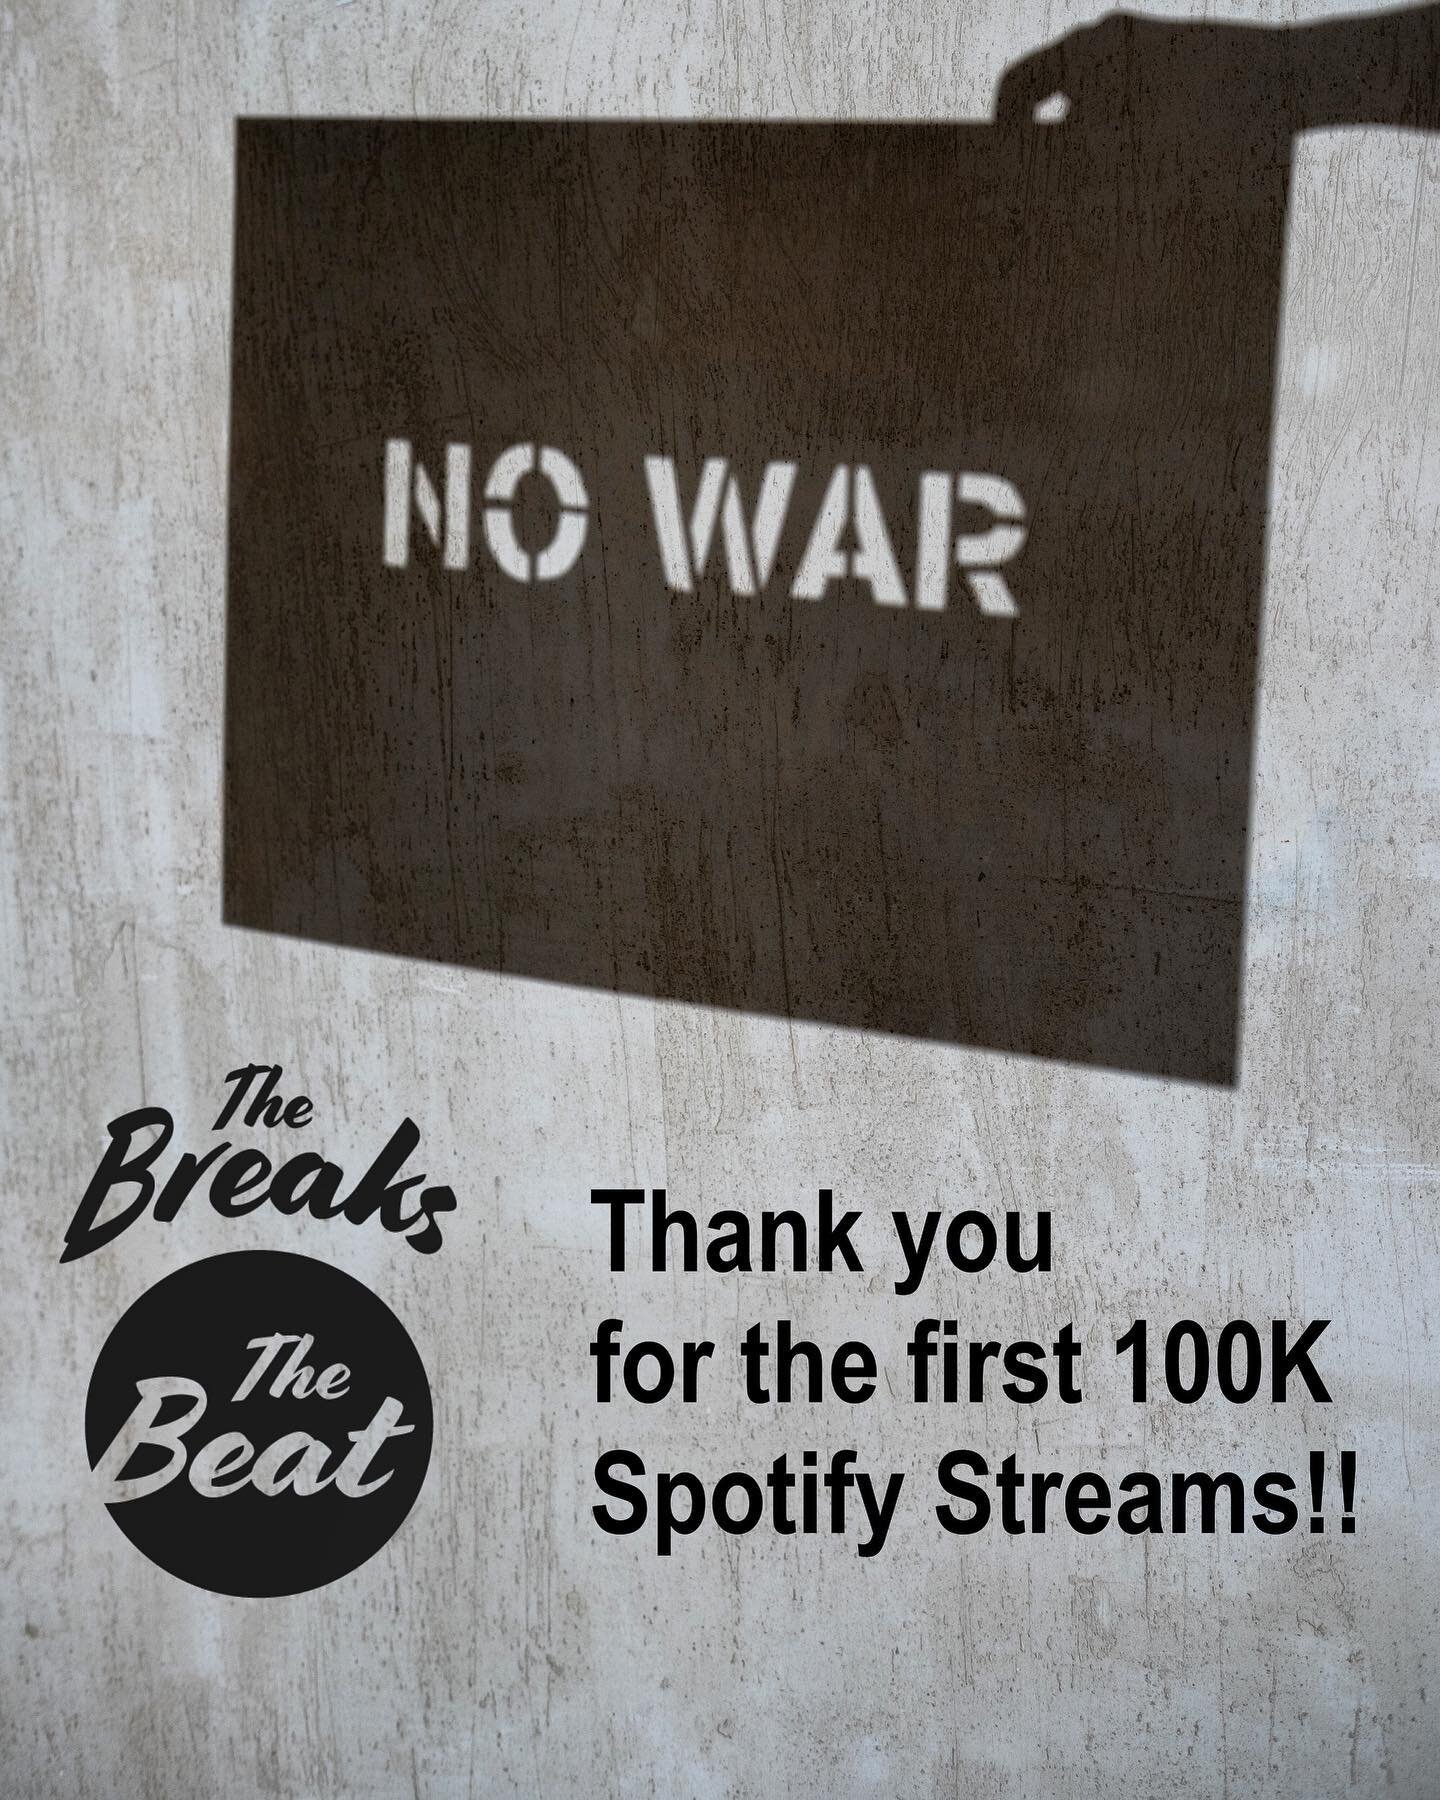 Just hit 100,000 streams of our new tune &lsquo;No WAR&rsquo; on Spotify! So happy!!! Thank you everyone! Check it out - link in Bio #supportlocalmusic #thebreaksthebeat